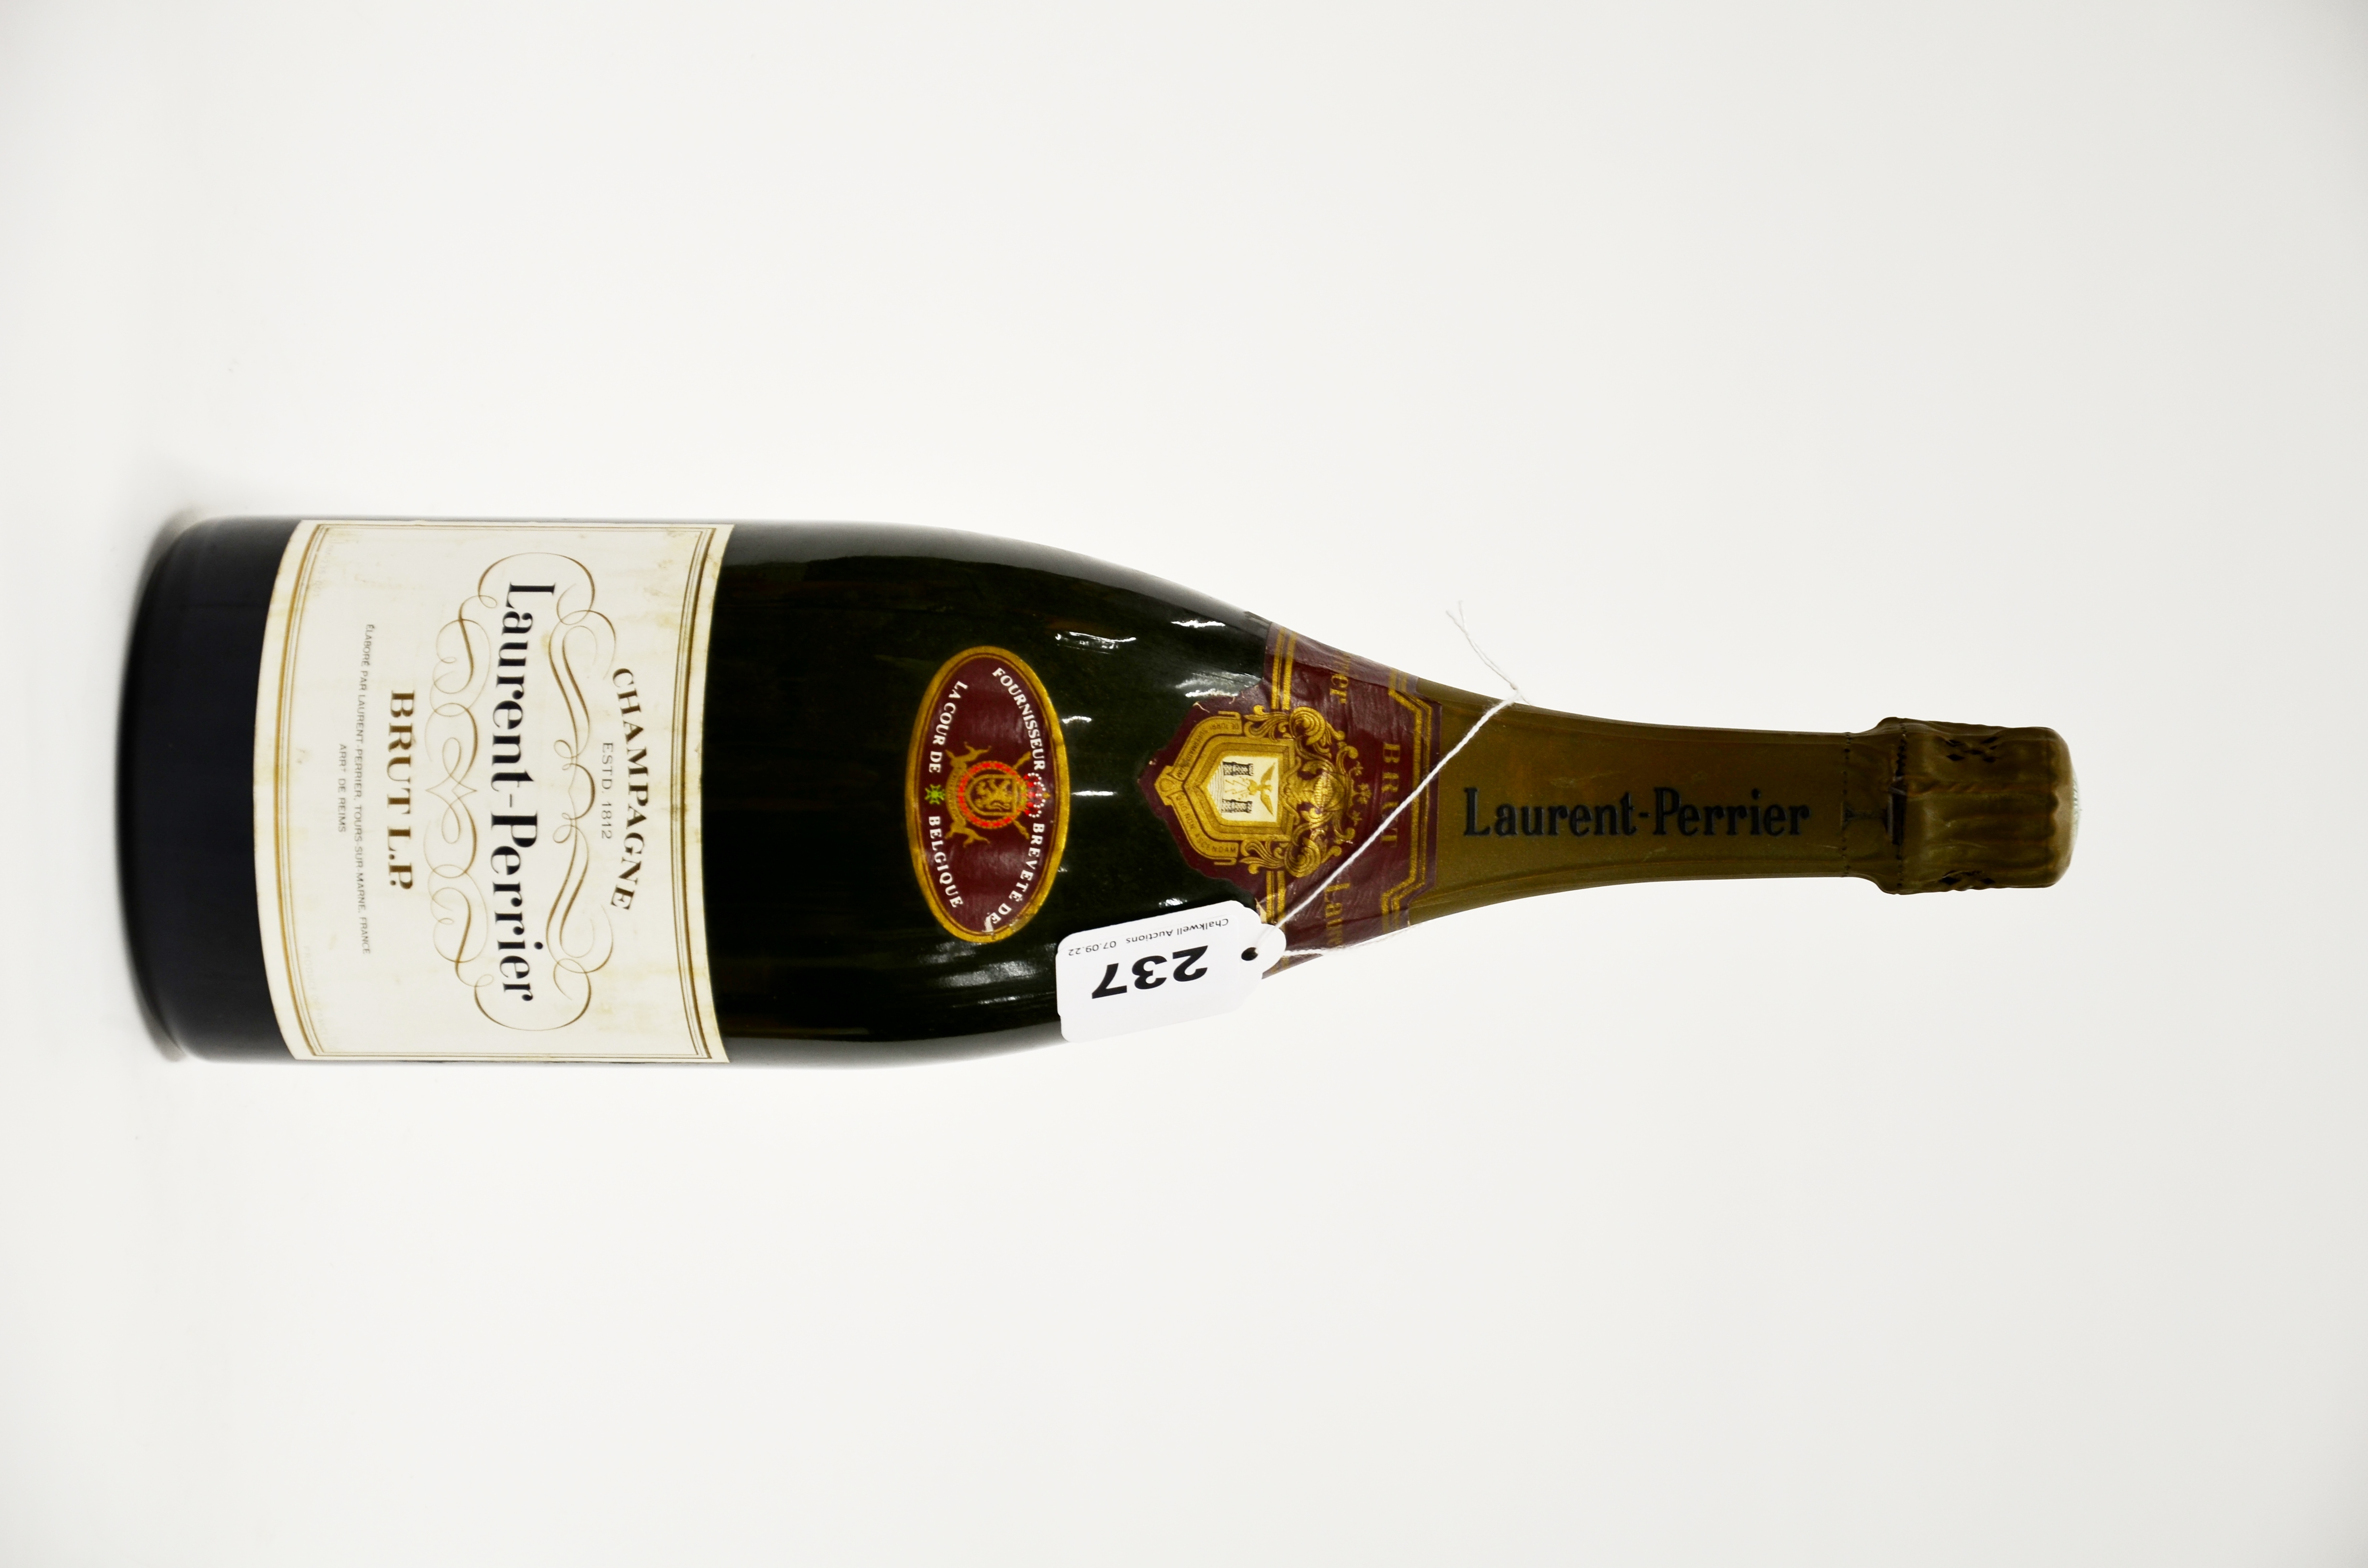 A 1.5L bottle of Laurent-Perrier champagne, together with a 1.5L bottle of silver Jubilee Moet & - Image 3 of 3